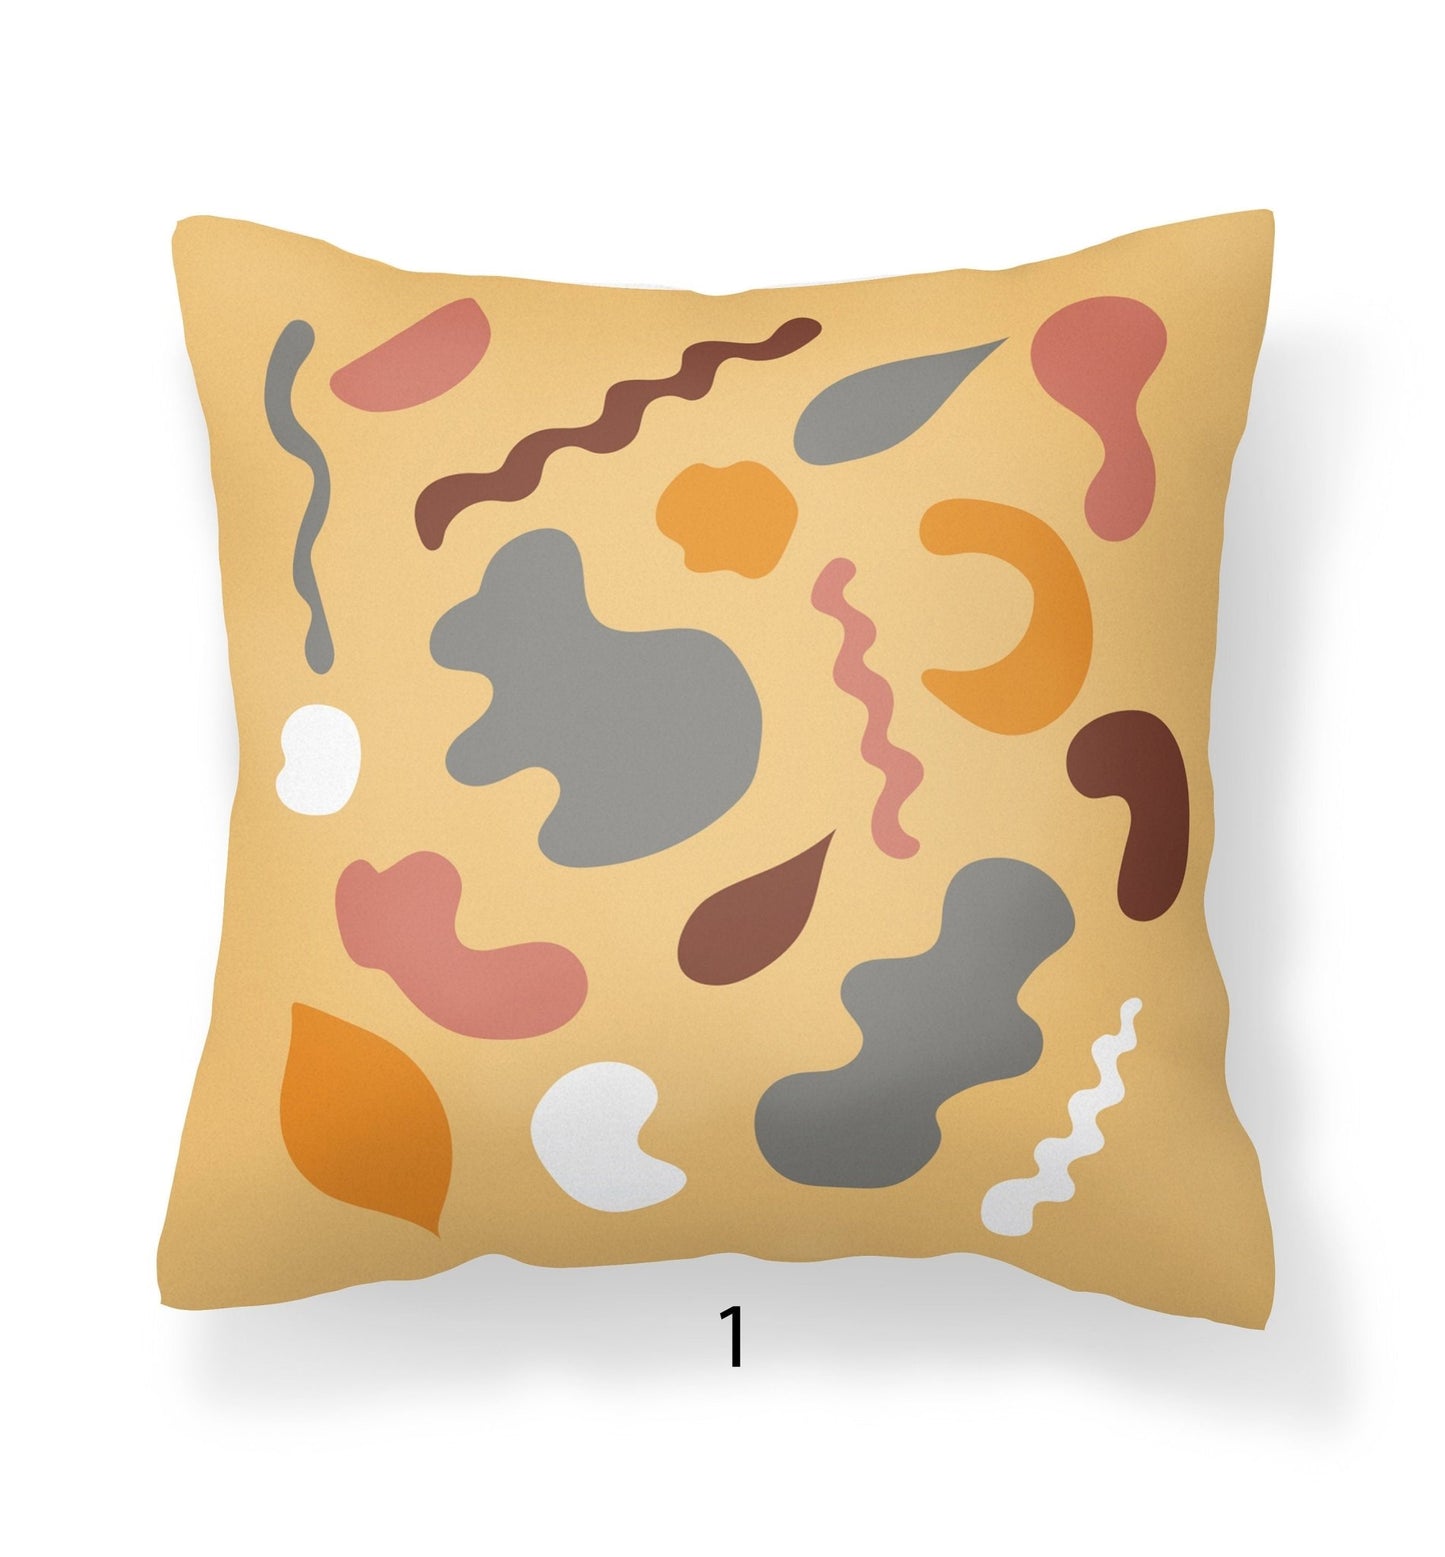 Boho Pillow Covers - Fun, Abstract Mix and Match